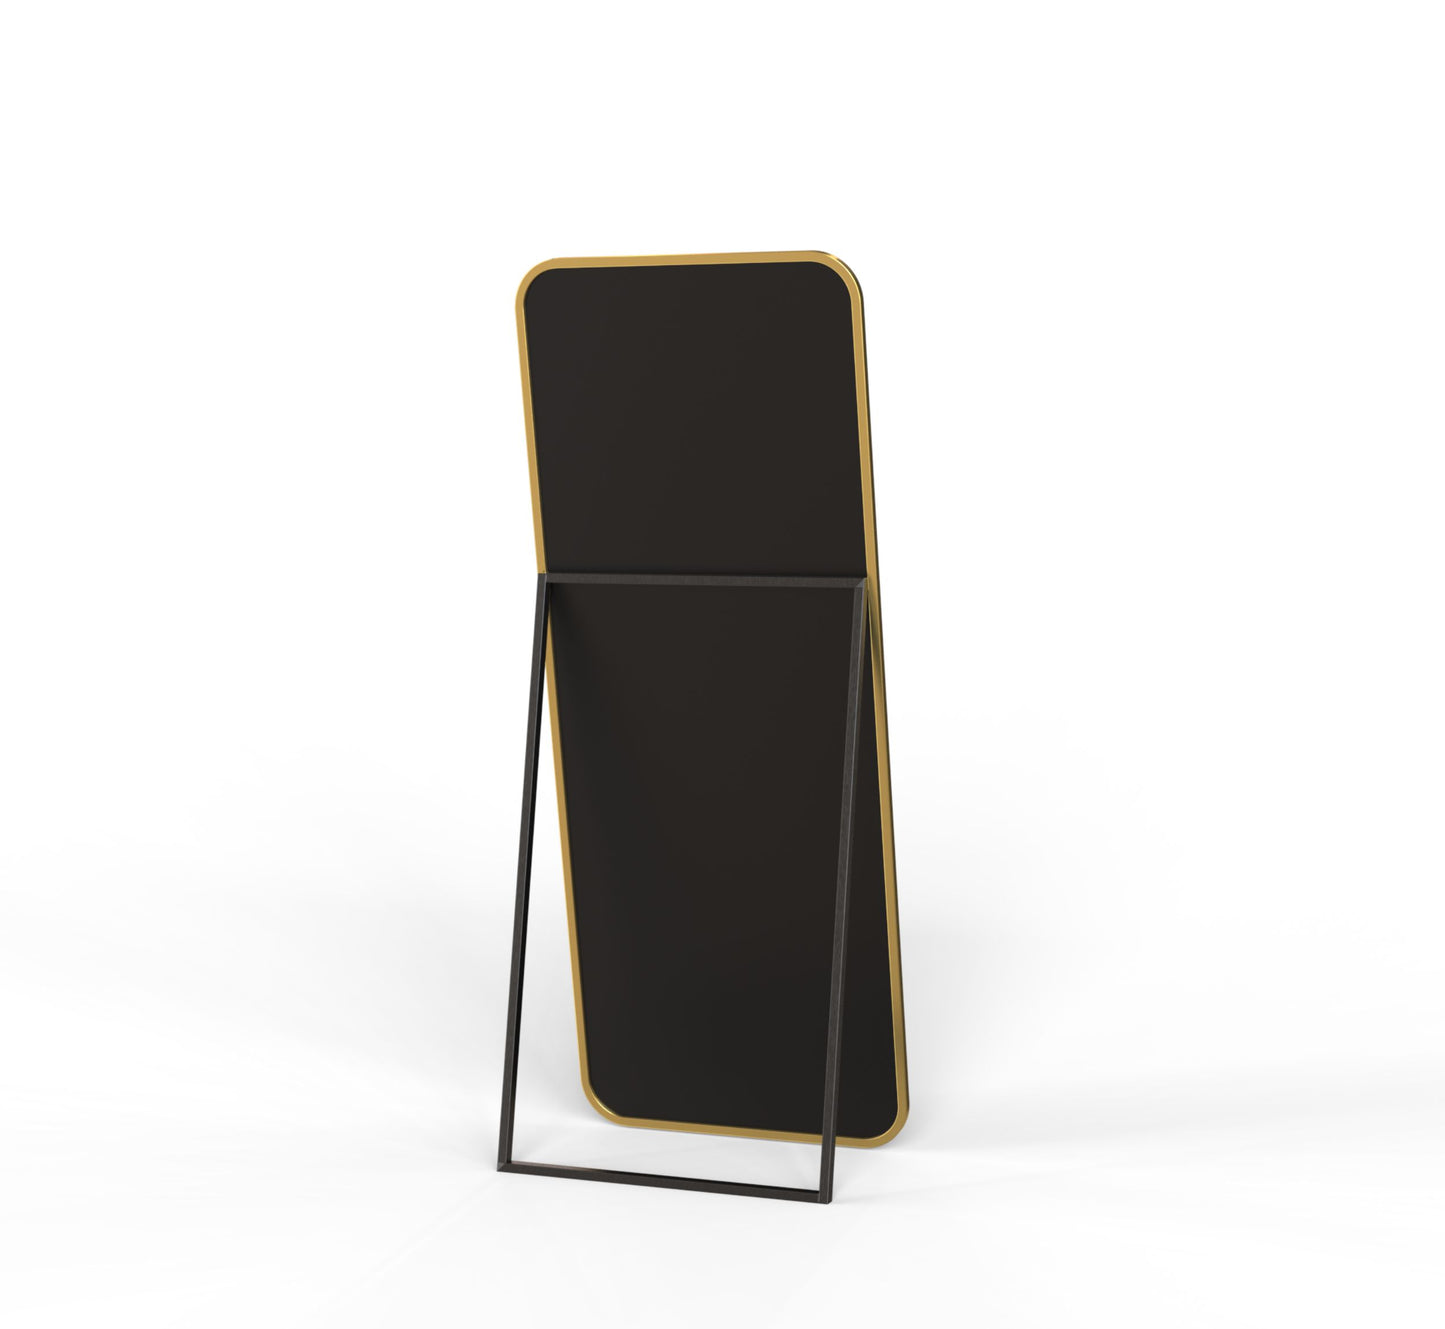 Mile Metal Floor Mirror with Stand